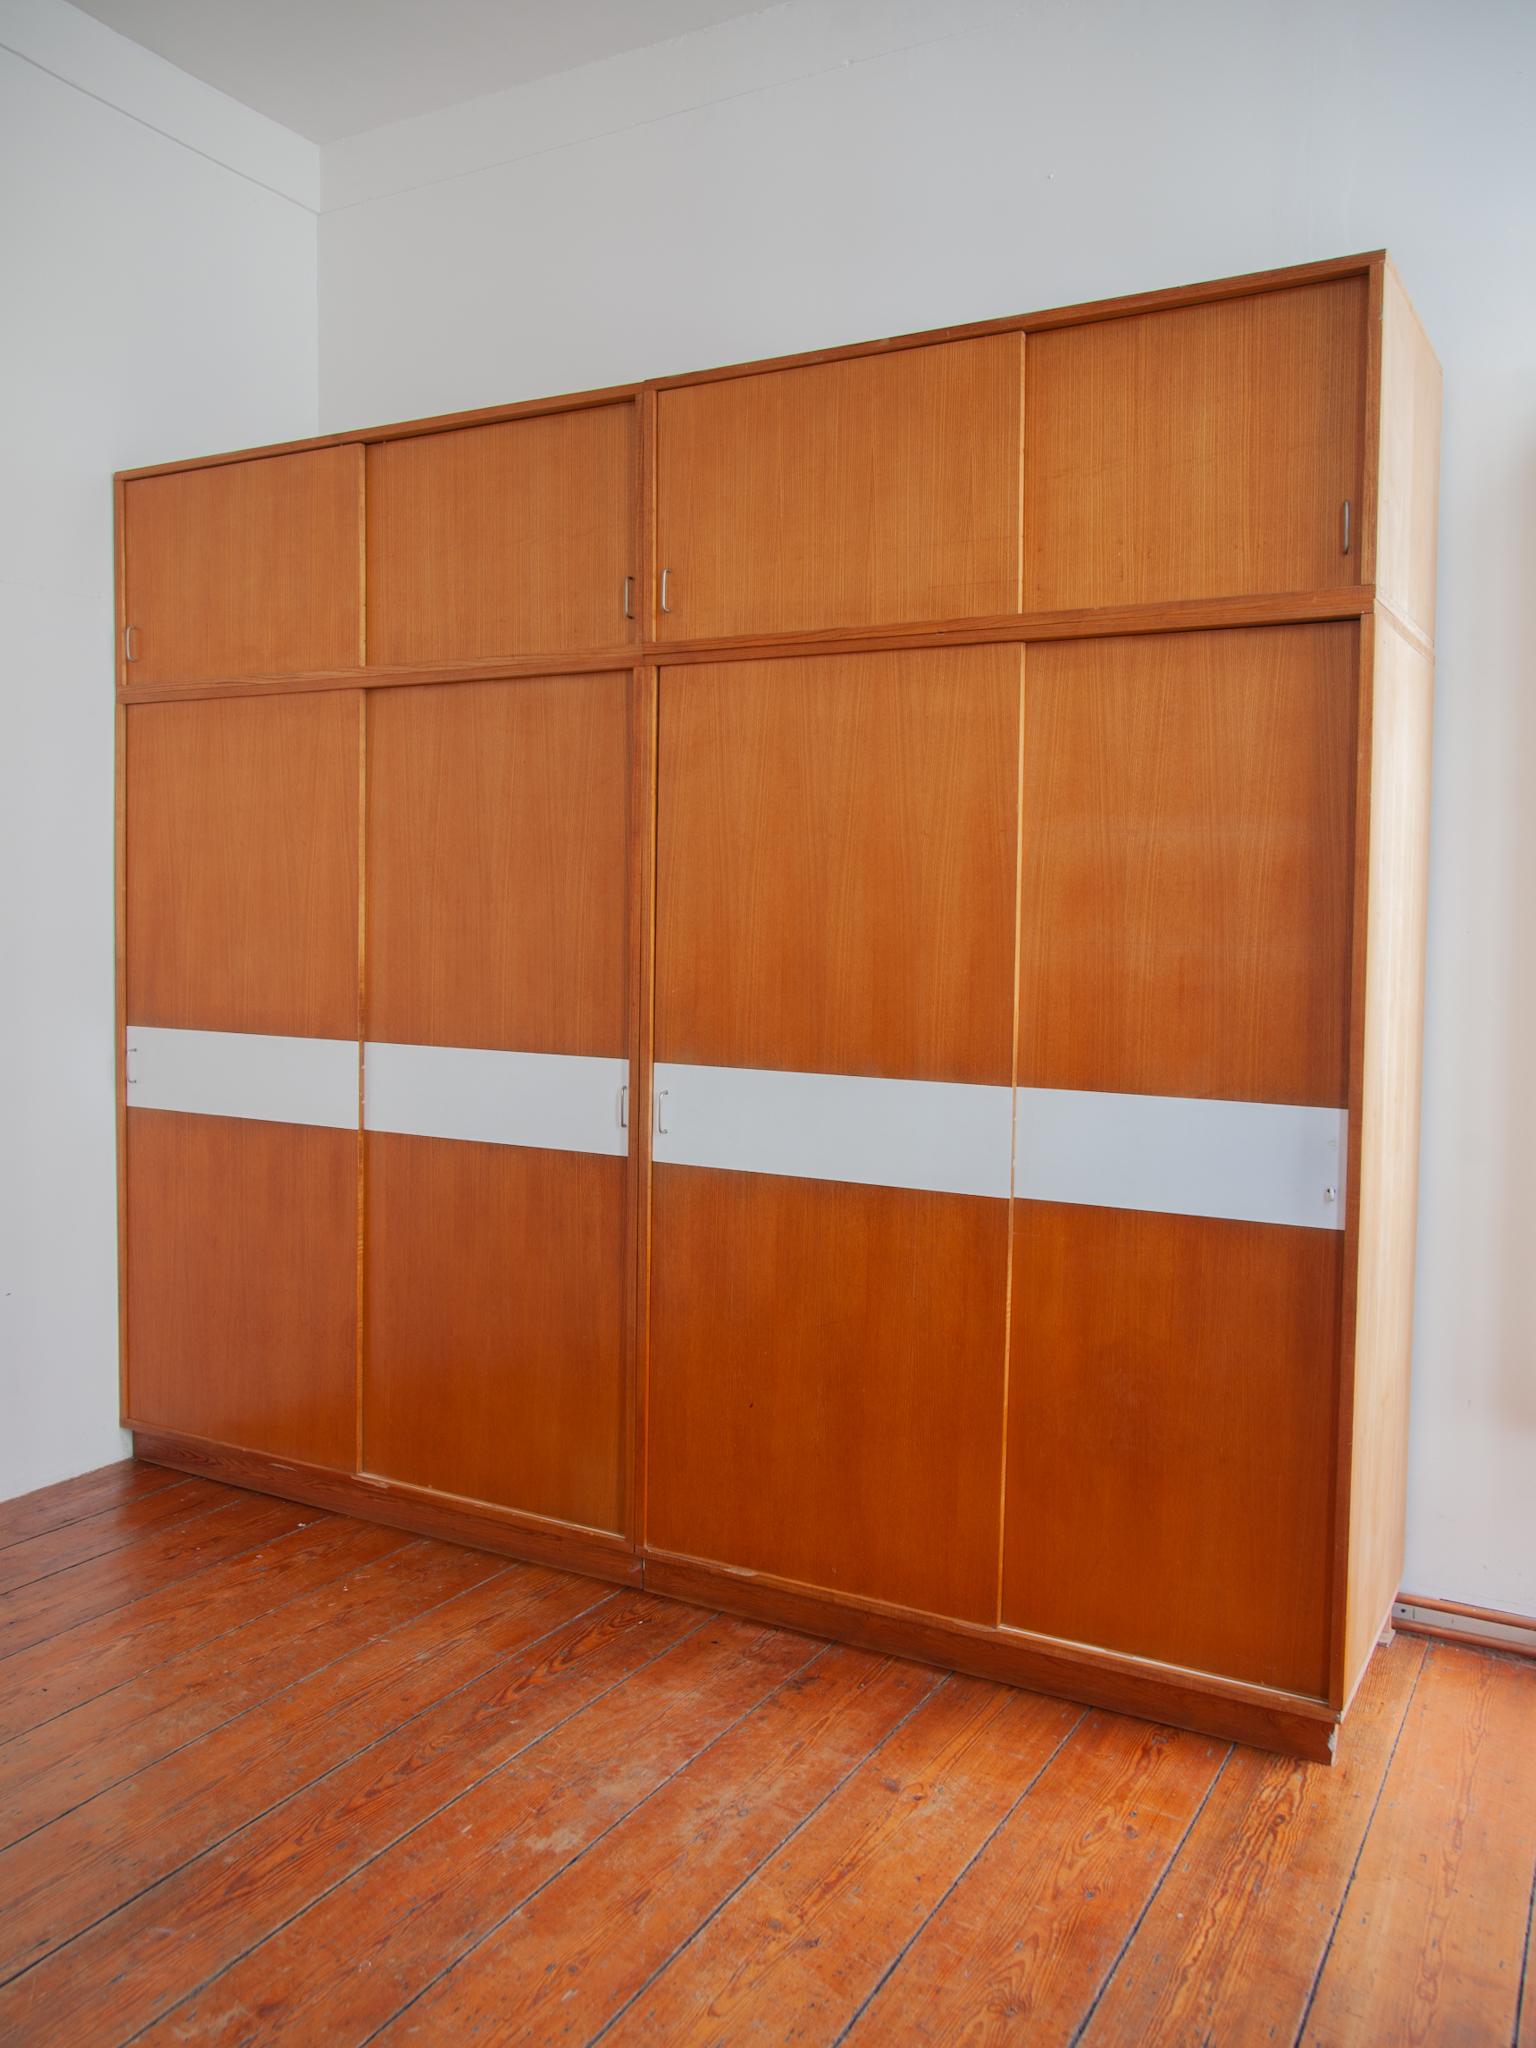 Very rare large wardrobe commissioned for a luxury apartment designed in 1960 by Jos De Mey one of the after the war Belgium Modern designers in the 50s and 60s.A beautiful loft ,sleeping-room or office wardrobe from cherrywood manufactured by Van